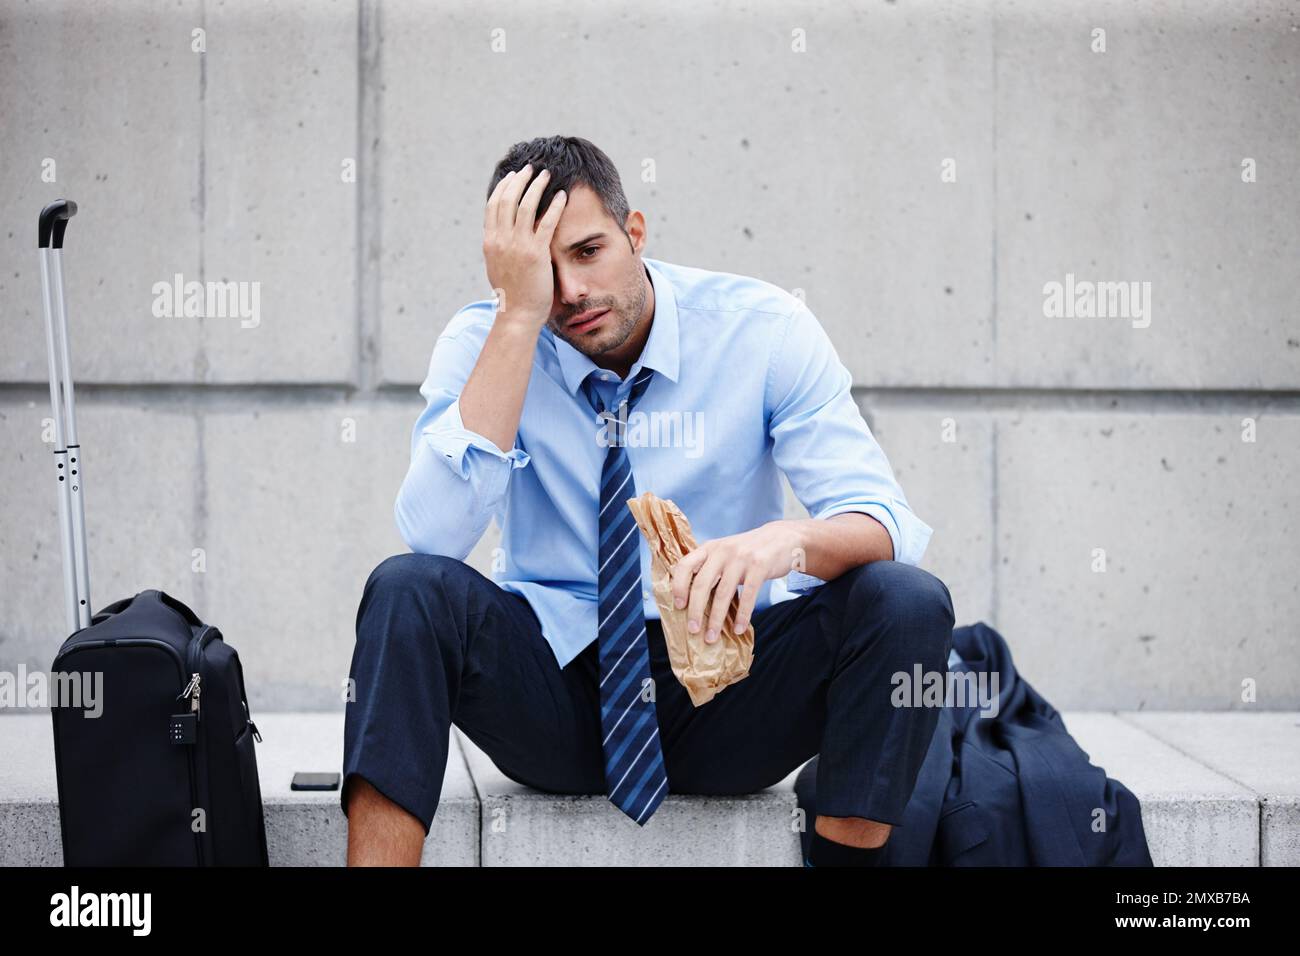 Down on his luck. A young businessman sitting outdoors and drinking while looking dejected. Stock Photo